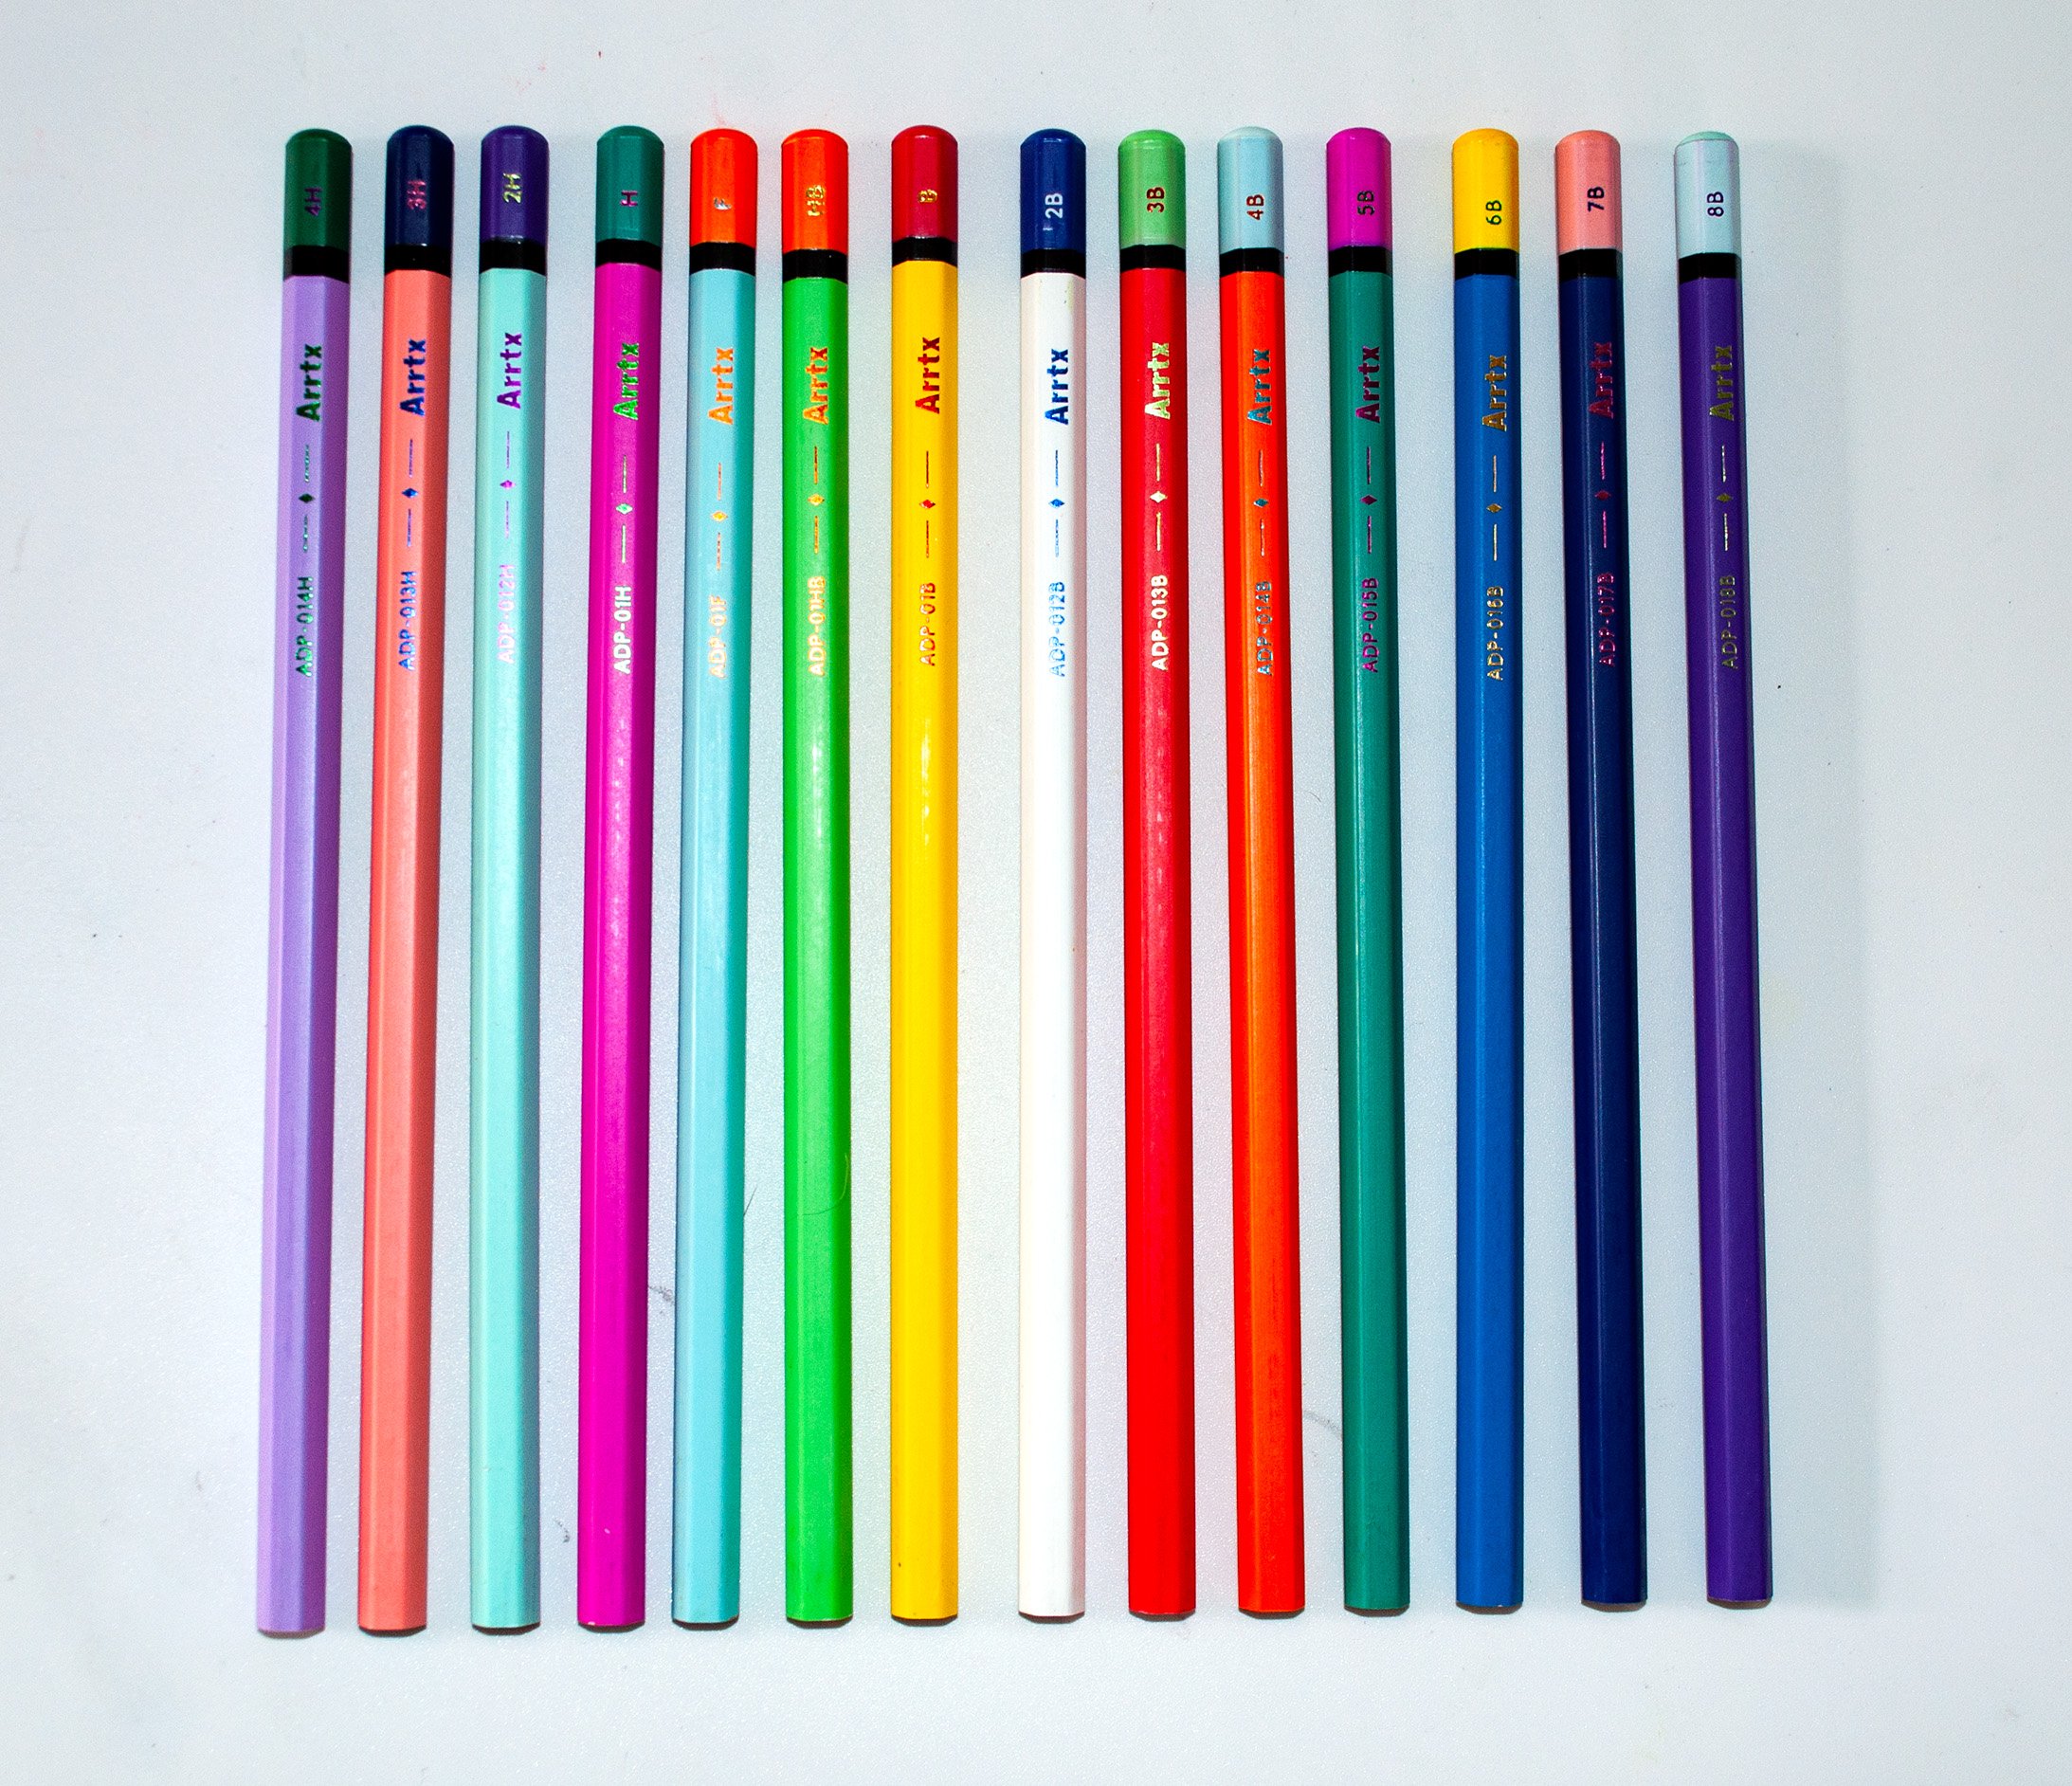 Arrtx Sketching Pencils Review — The Art Gear Guide